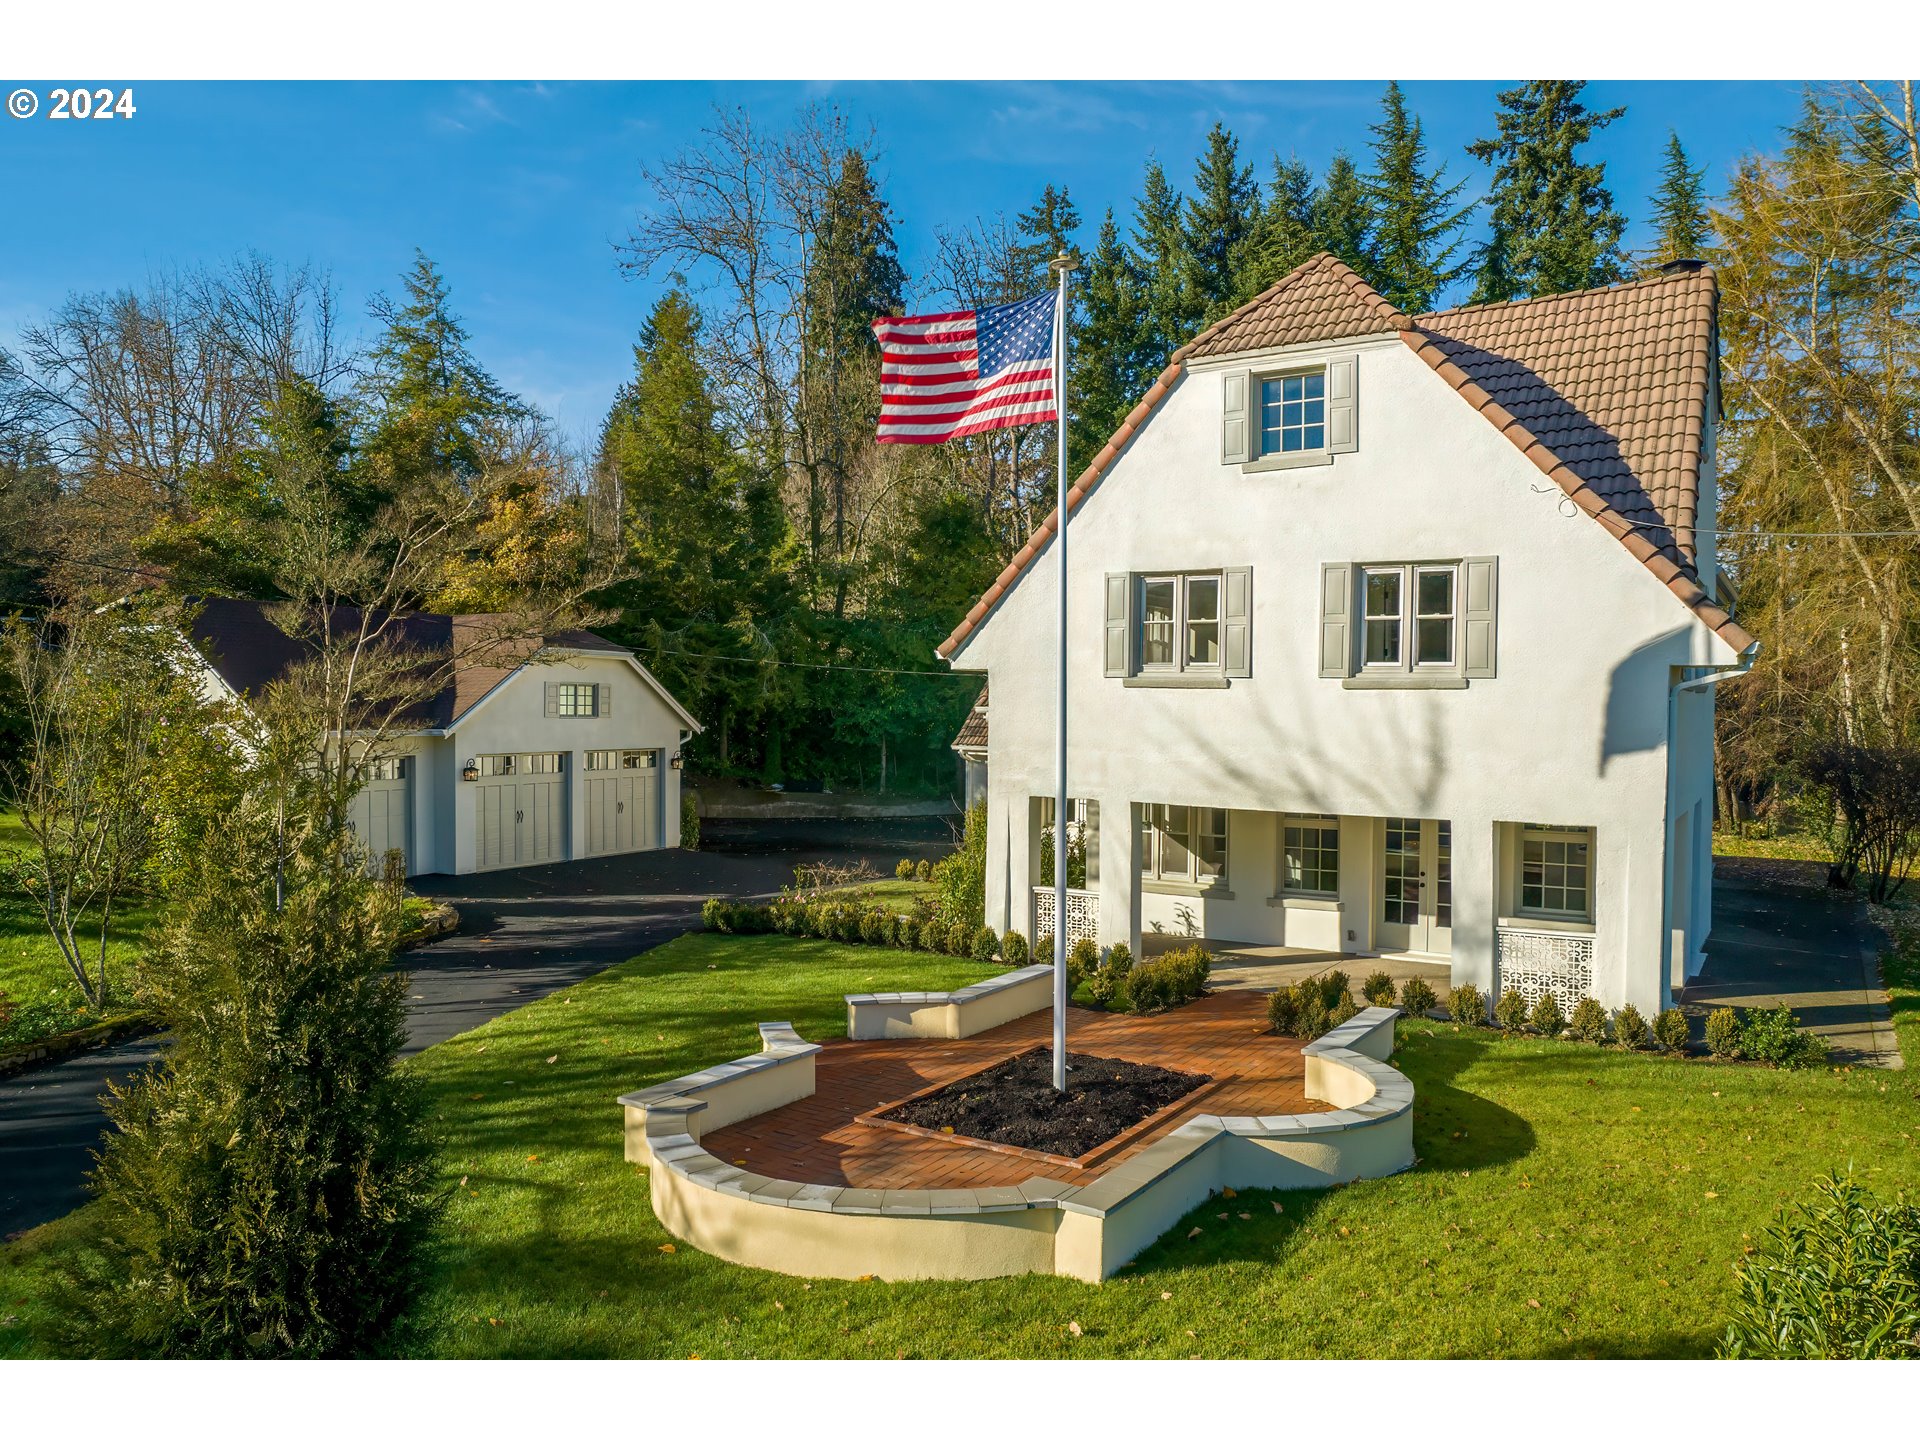 This exquisitely revitalized English Cottage-style residence in Lake Oswego's Glenmorrie neighborhood seamlessly blends historic charm with modern luxury. Originally designed in 1918 by Sutton & Whitney and meticulously refreshed by designer Phil Chek, this 106-year-old home sits on half an acre of land. The interior features a layout perfectly suited for entertaining with new, imported French oak hardwood floors and freshly painted white walls. The home seamlessly integrates indoor/outdoor living, with the living room leading to a covered patio, the dining room providing a connection to the backyard, and a well-appointed kitchen featuring quartz countertops and a charming wood-burning stove. The basement, with a unique history as part of the original ranch reservoir, serves as additional storage. A guest or nanny quarters, a newly-built three-car garage, and a century-old legacy make this timeless architectural icon an exceptional property.